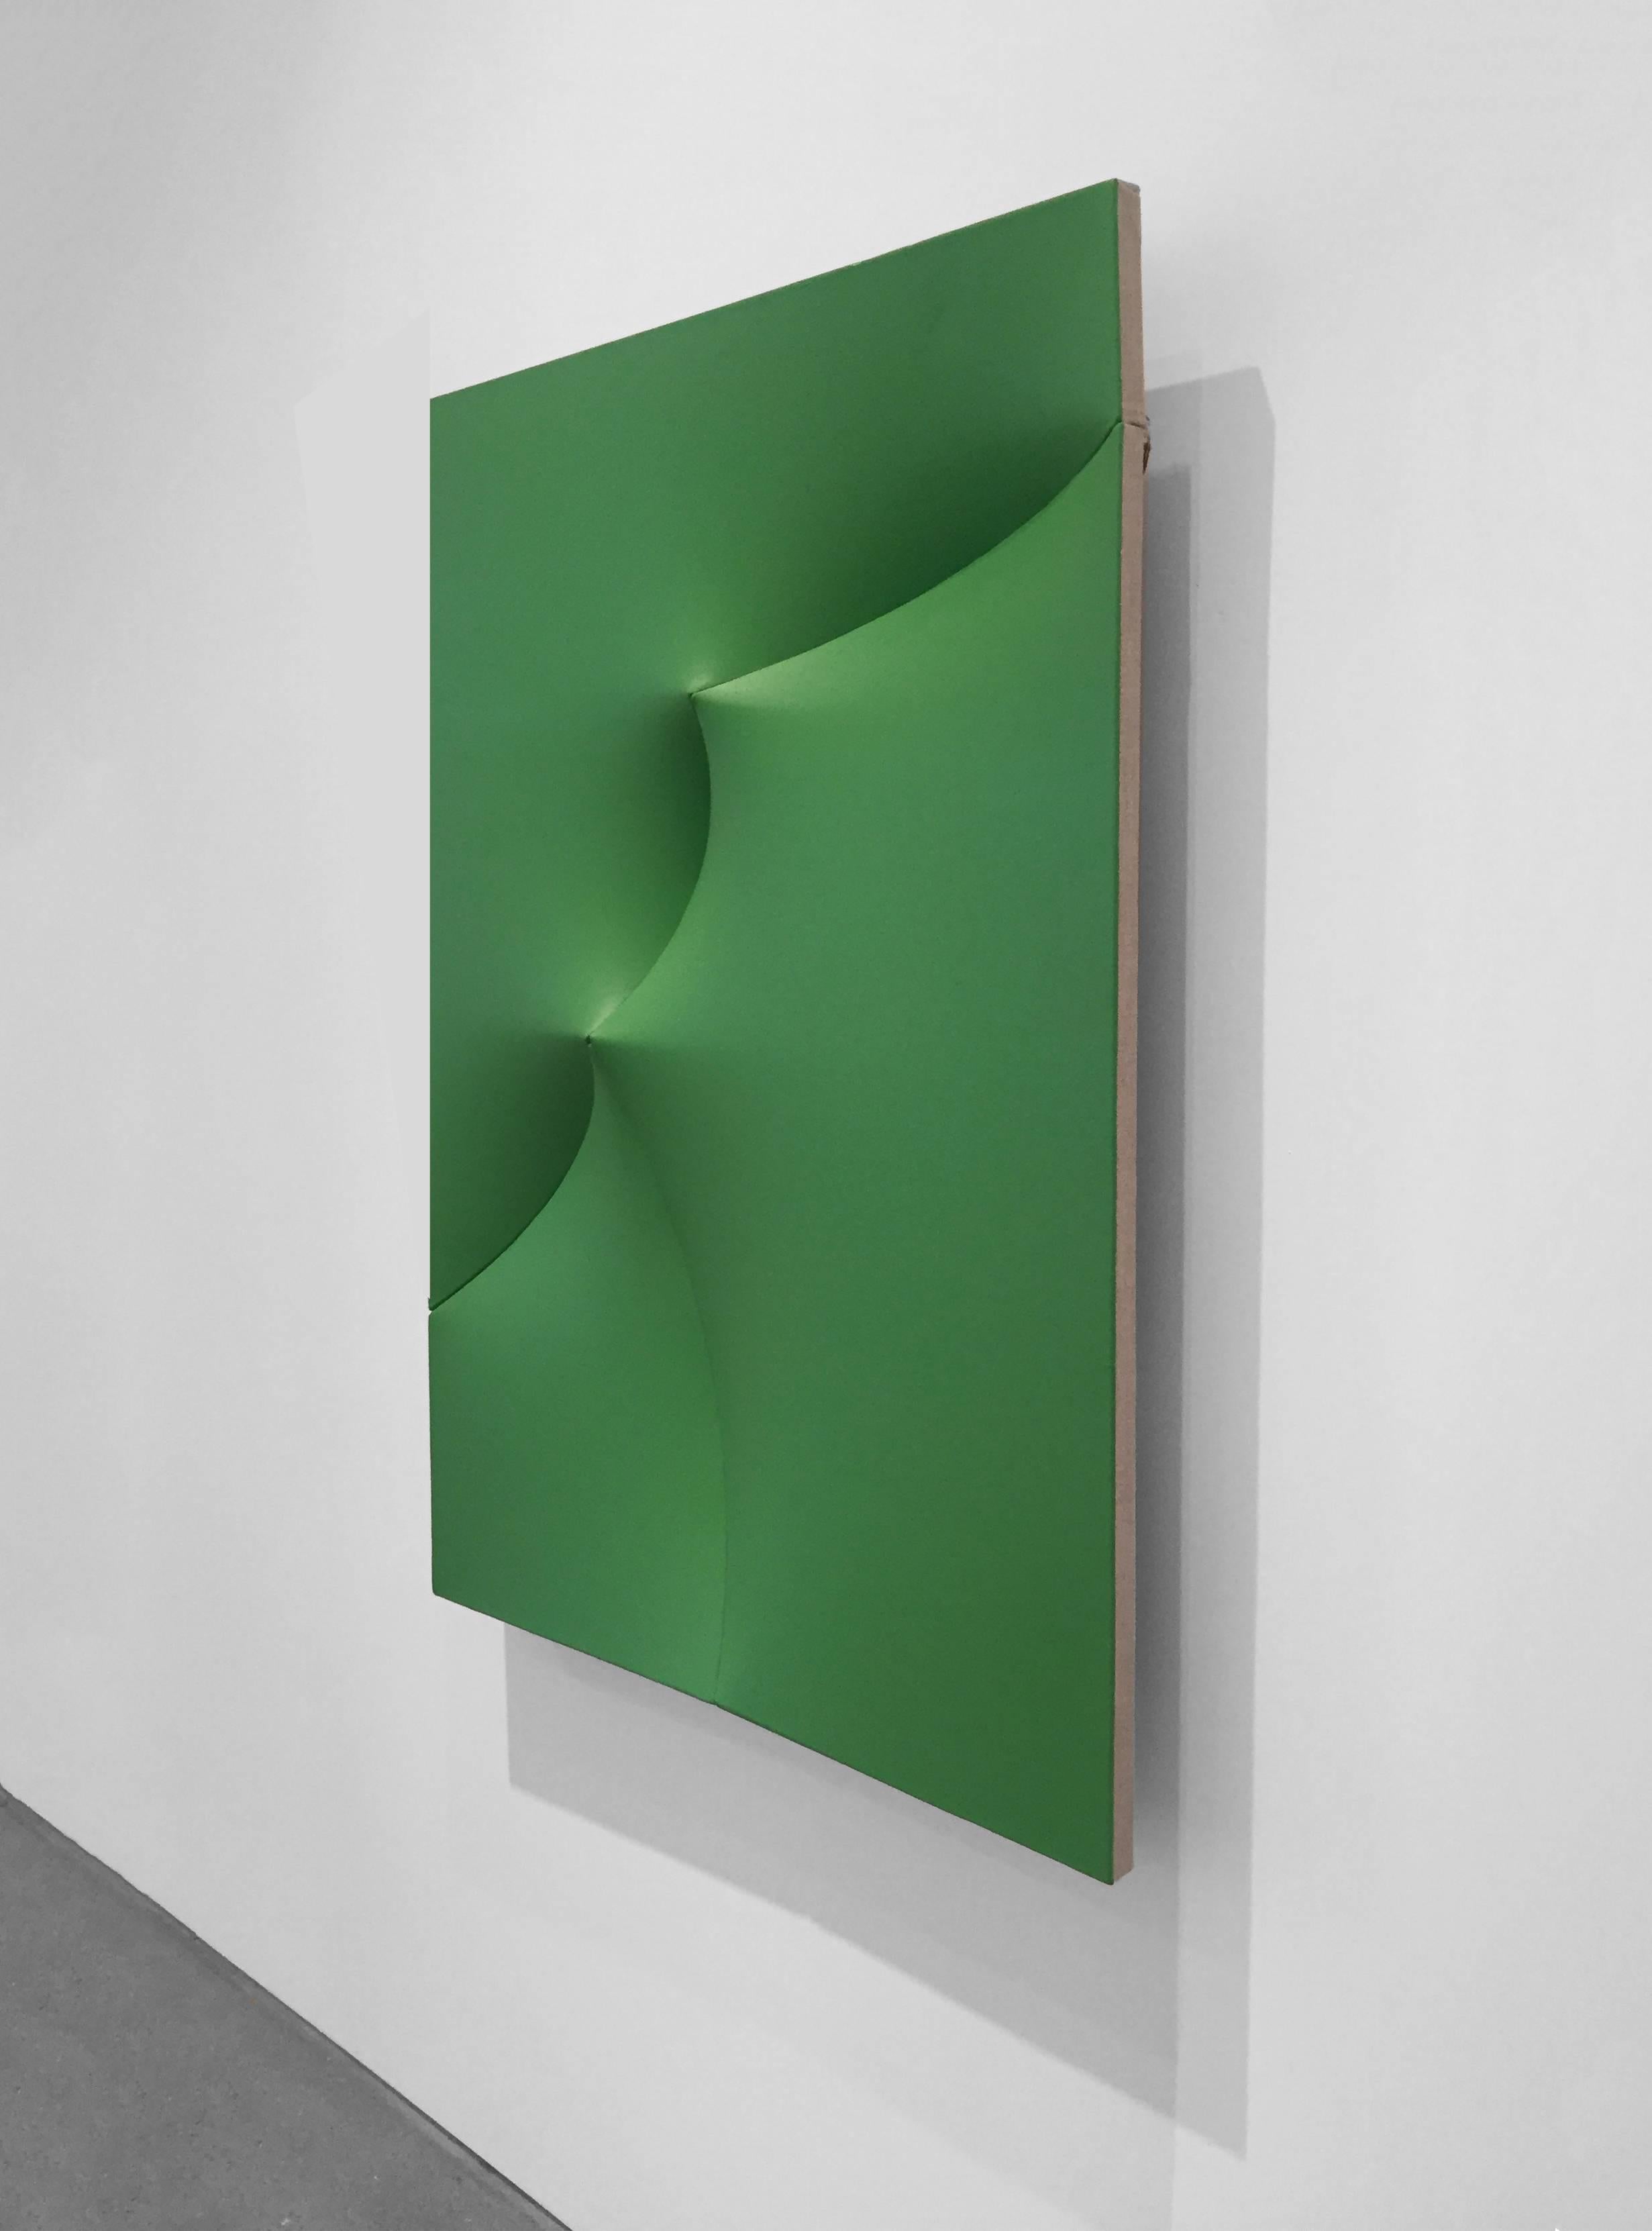 Jan Maarten Voskuil Abstract Painting - Pointing Out Broken Green